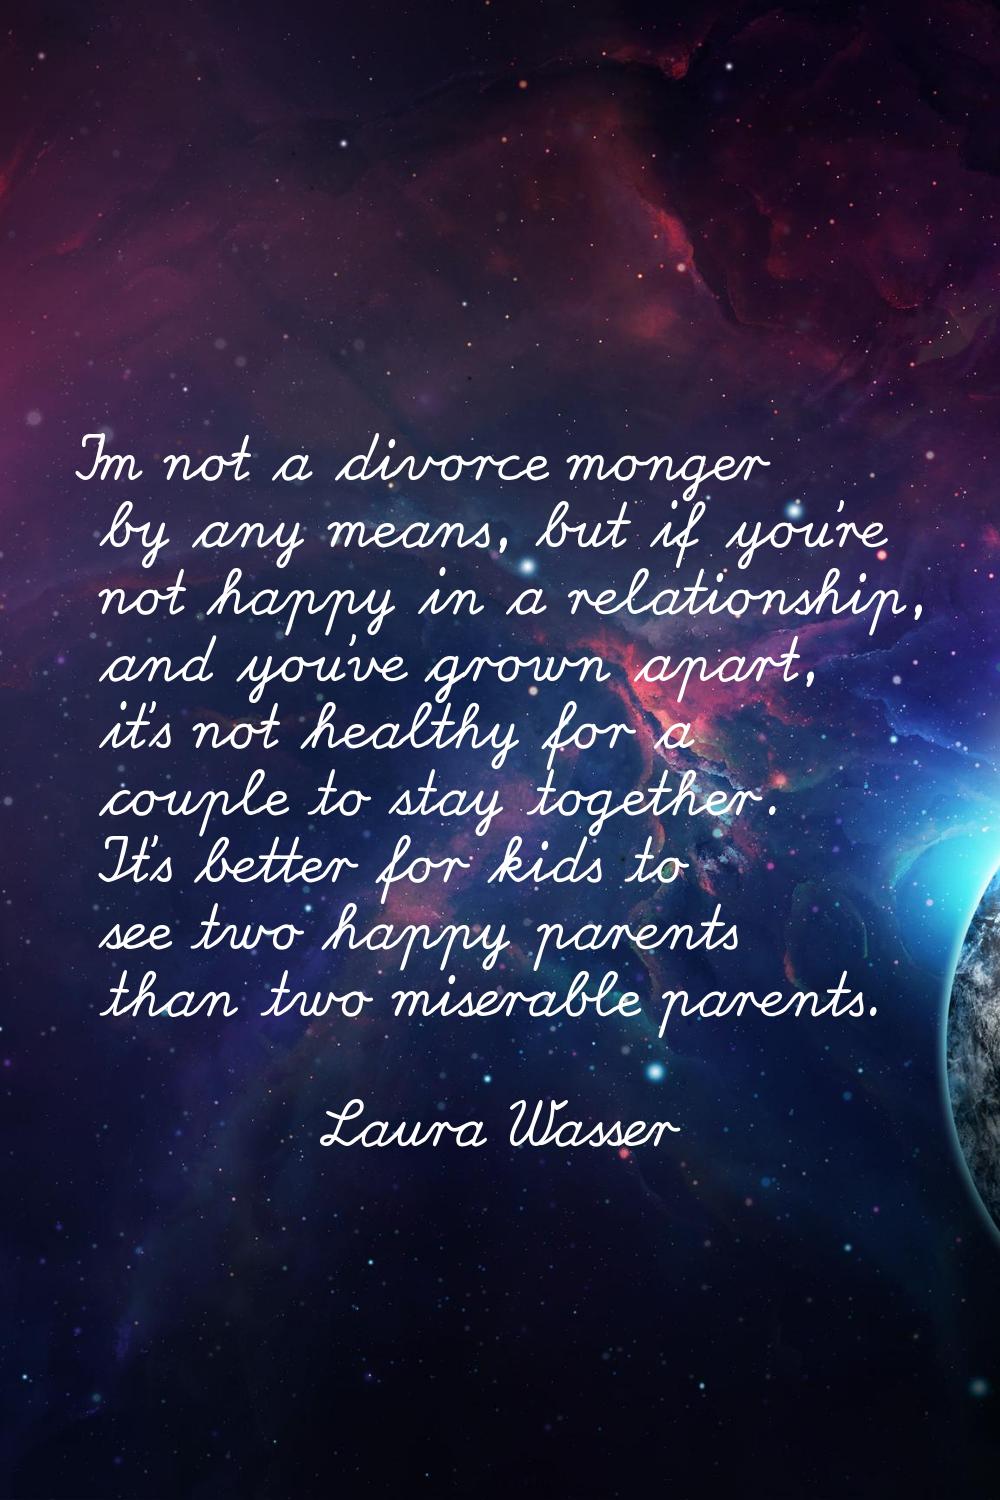 I'm not a divorce monger by any means, but if you're not happy in a relationship, and you've grown 